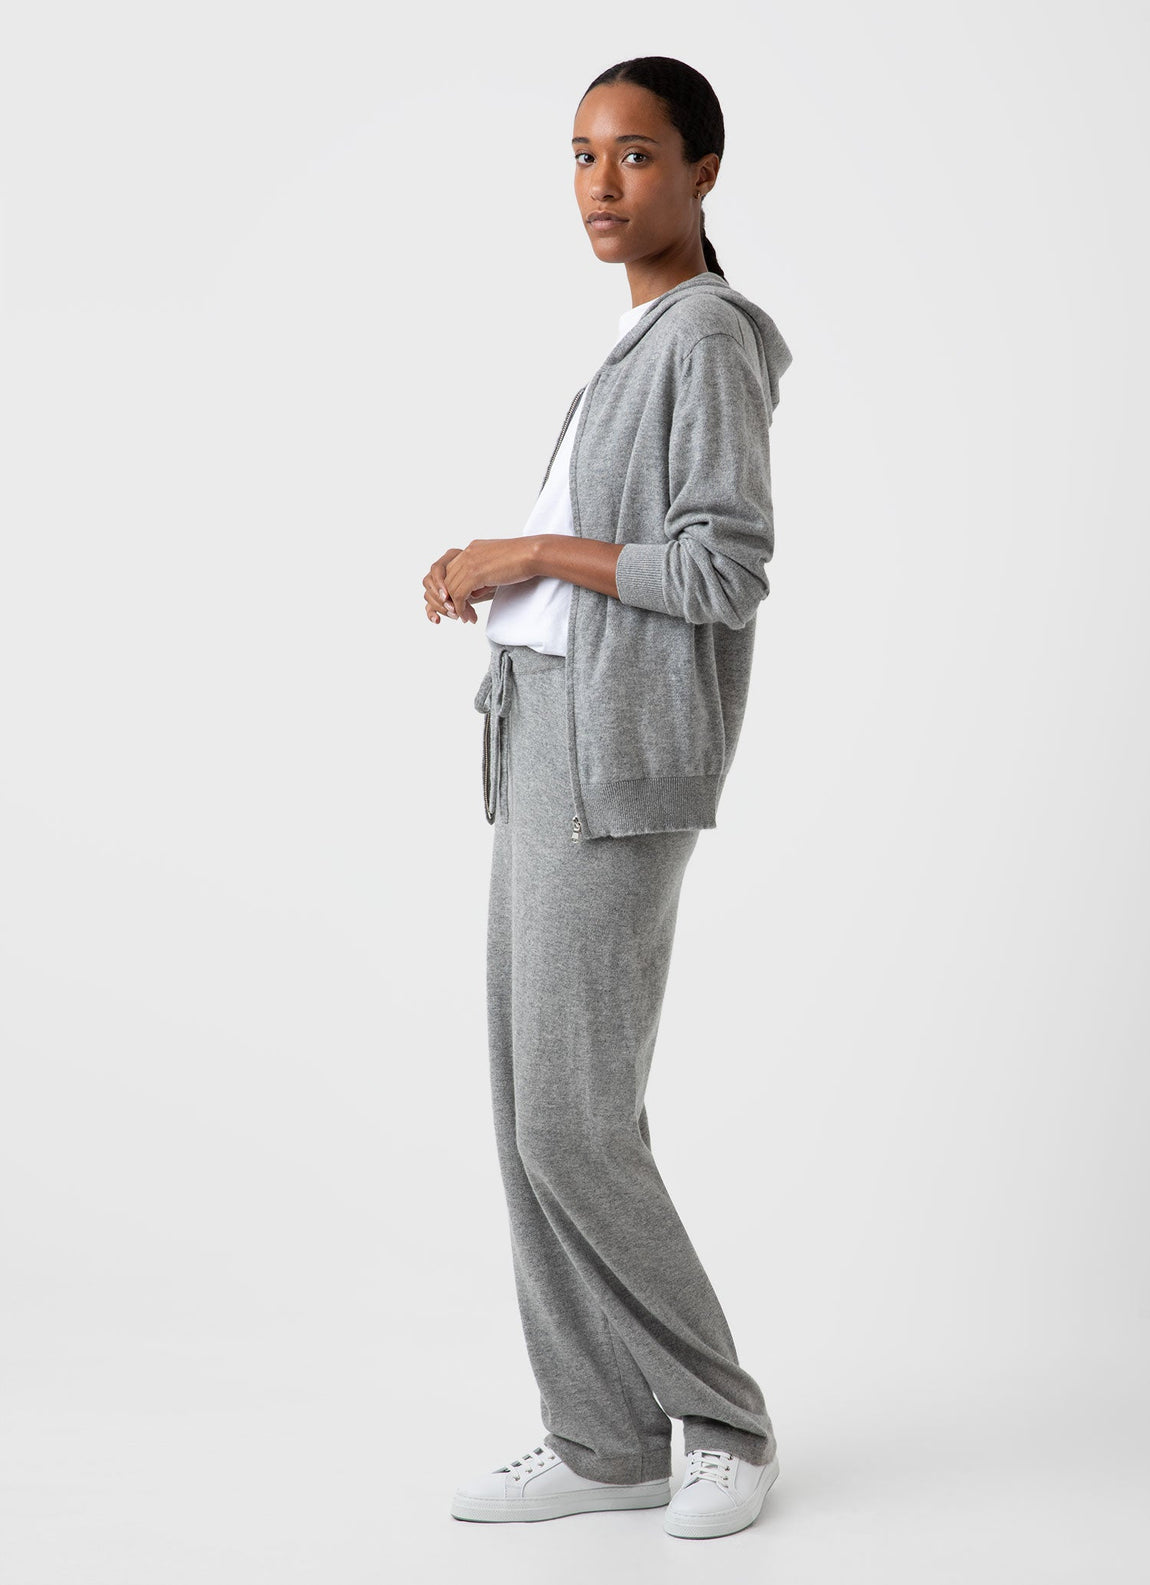 Cashmere Loungewear - Our Collection